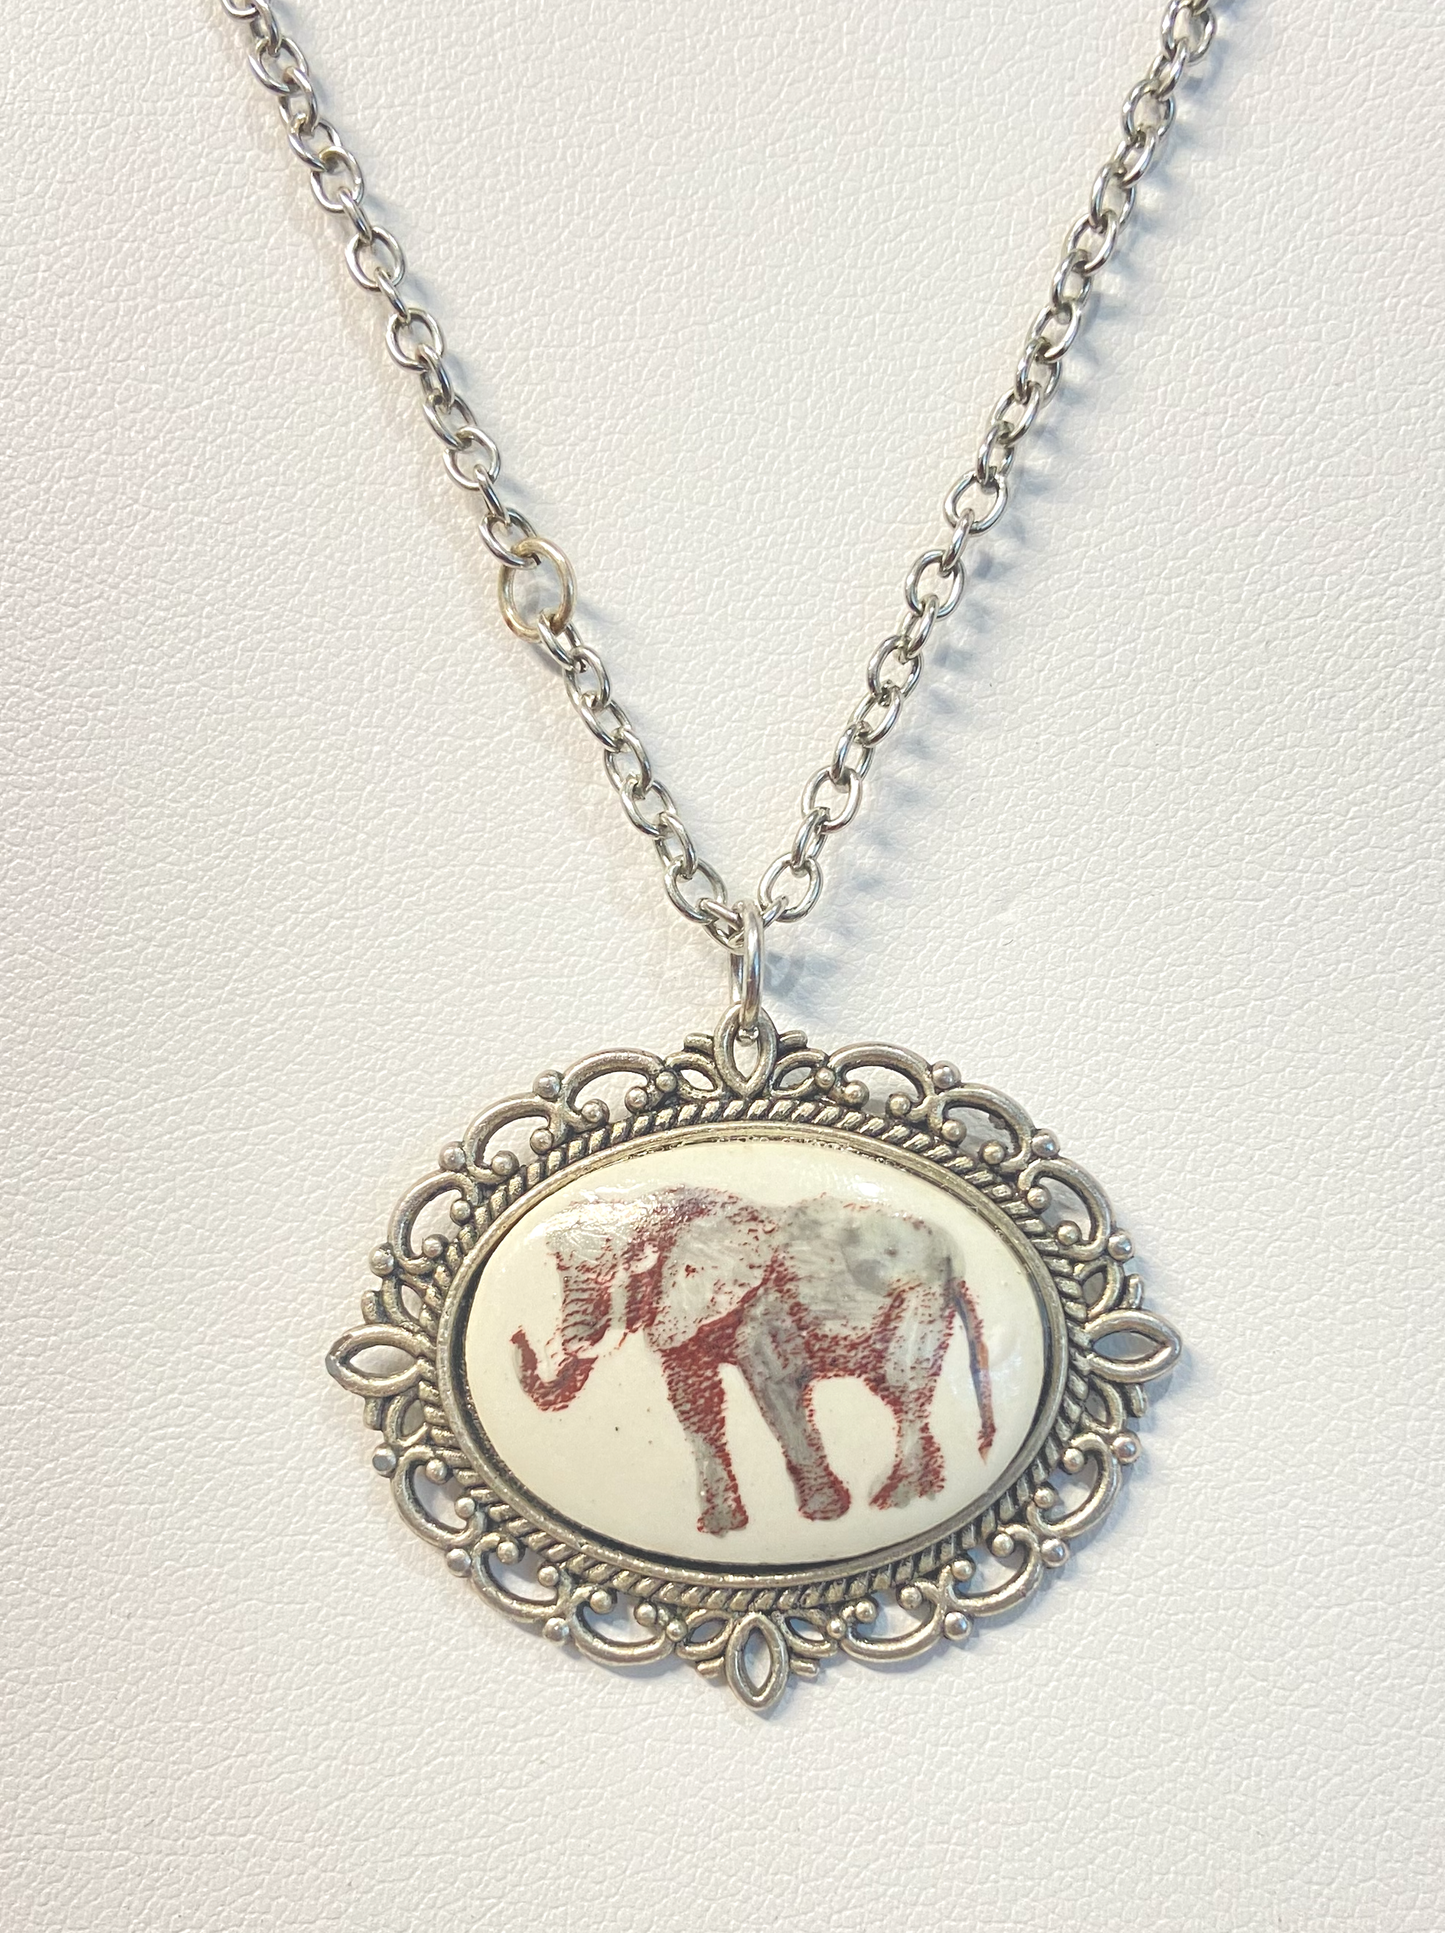 SPIRIT NECKLACE, GIFT FOR MOM, ELEPHANT JEWELRY, FOOTBALL NECKLACE